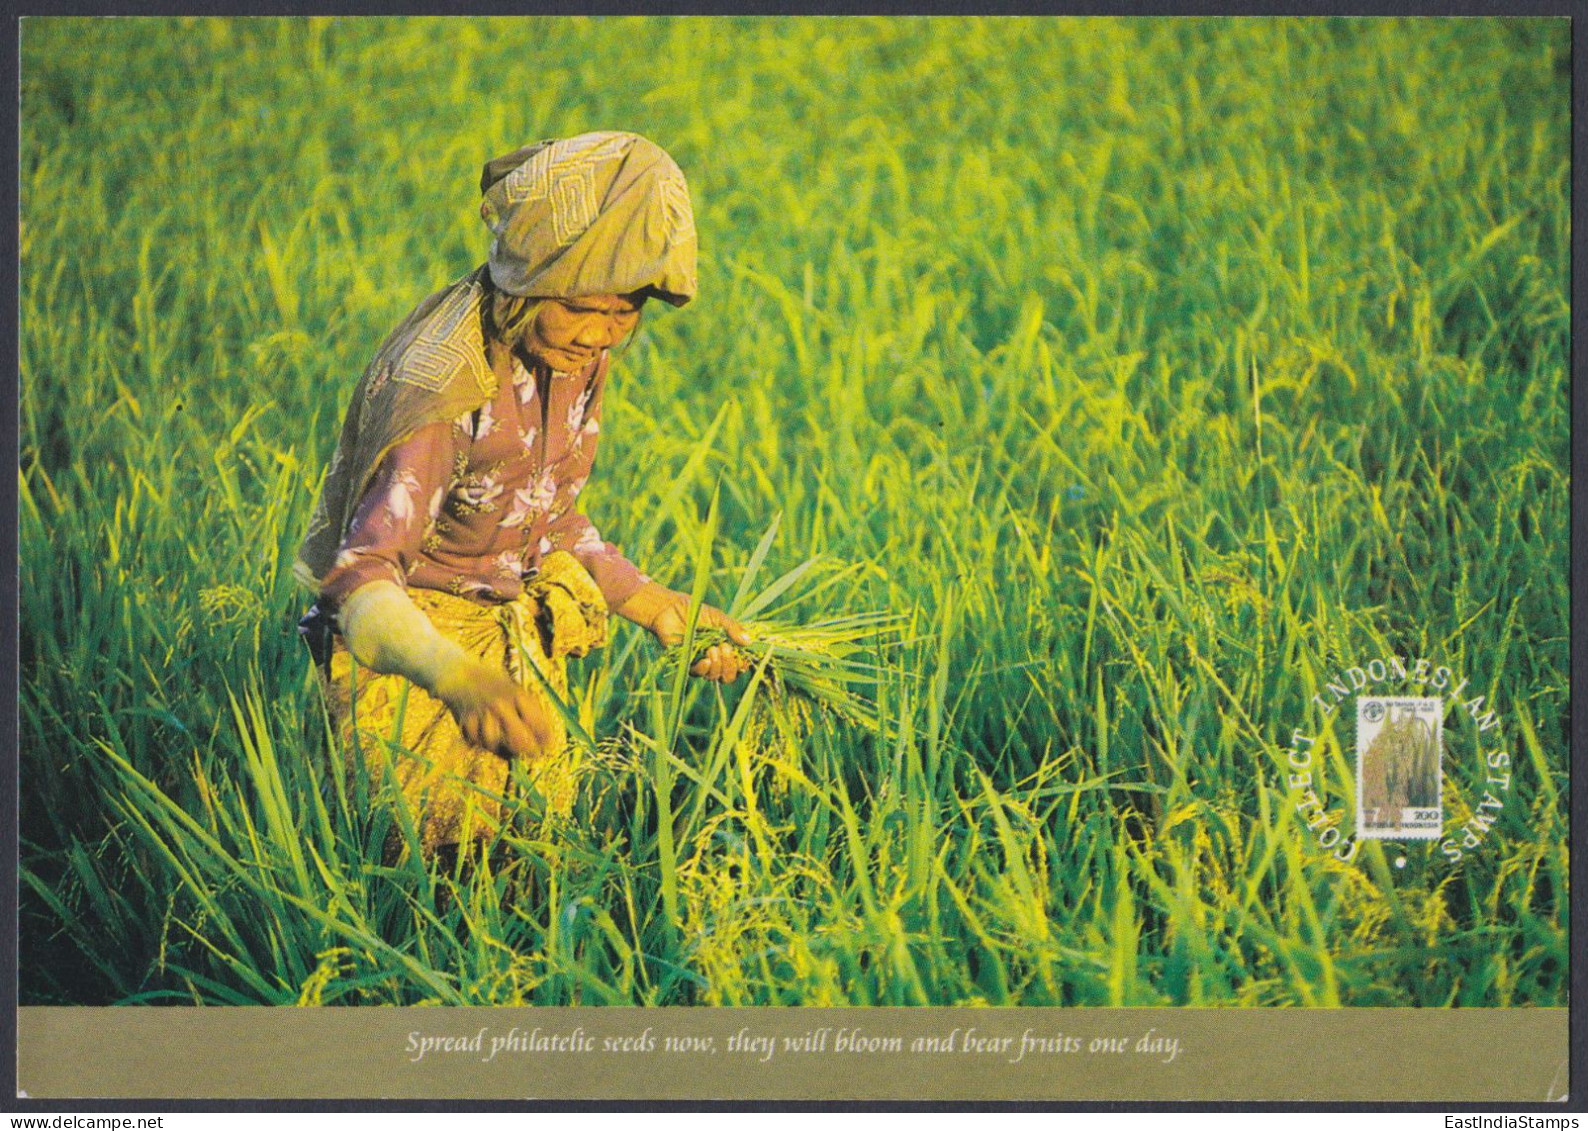 Indonesia 2000 Mint Postcard Paddy Picking Sumedang, West Java, Rice, Farming, Farm, Agriculture, Farmer, Woman - Indonesia